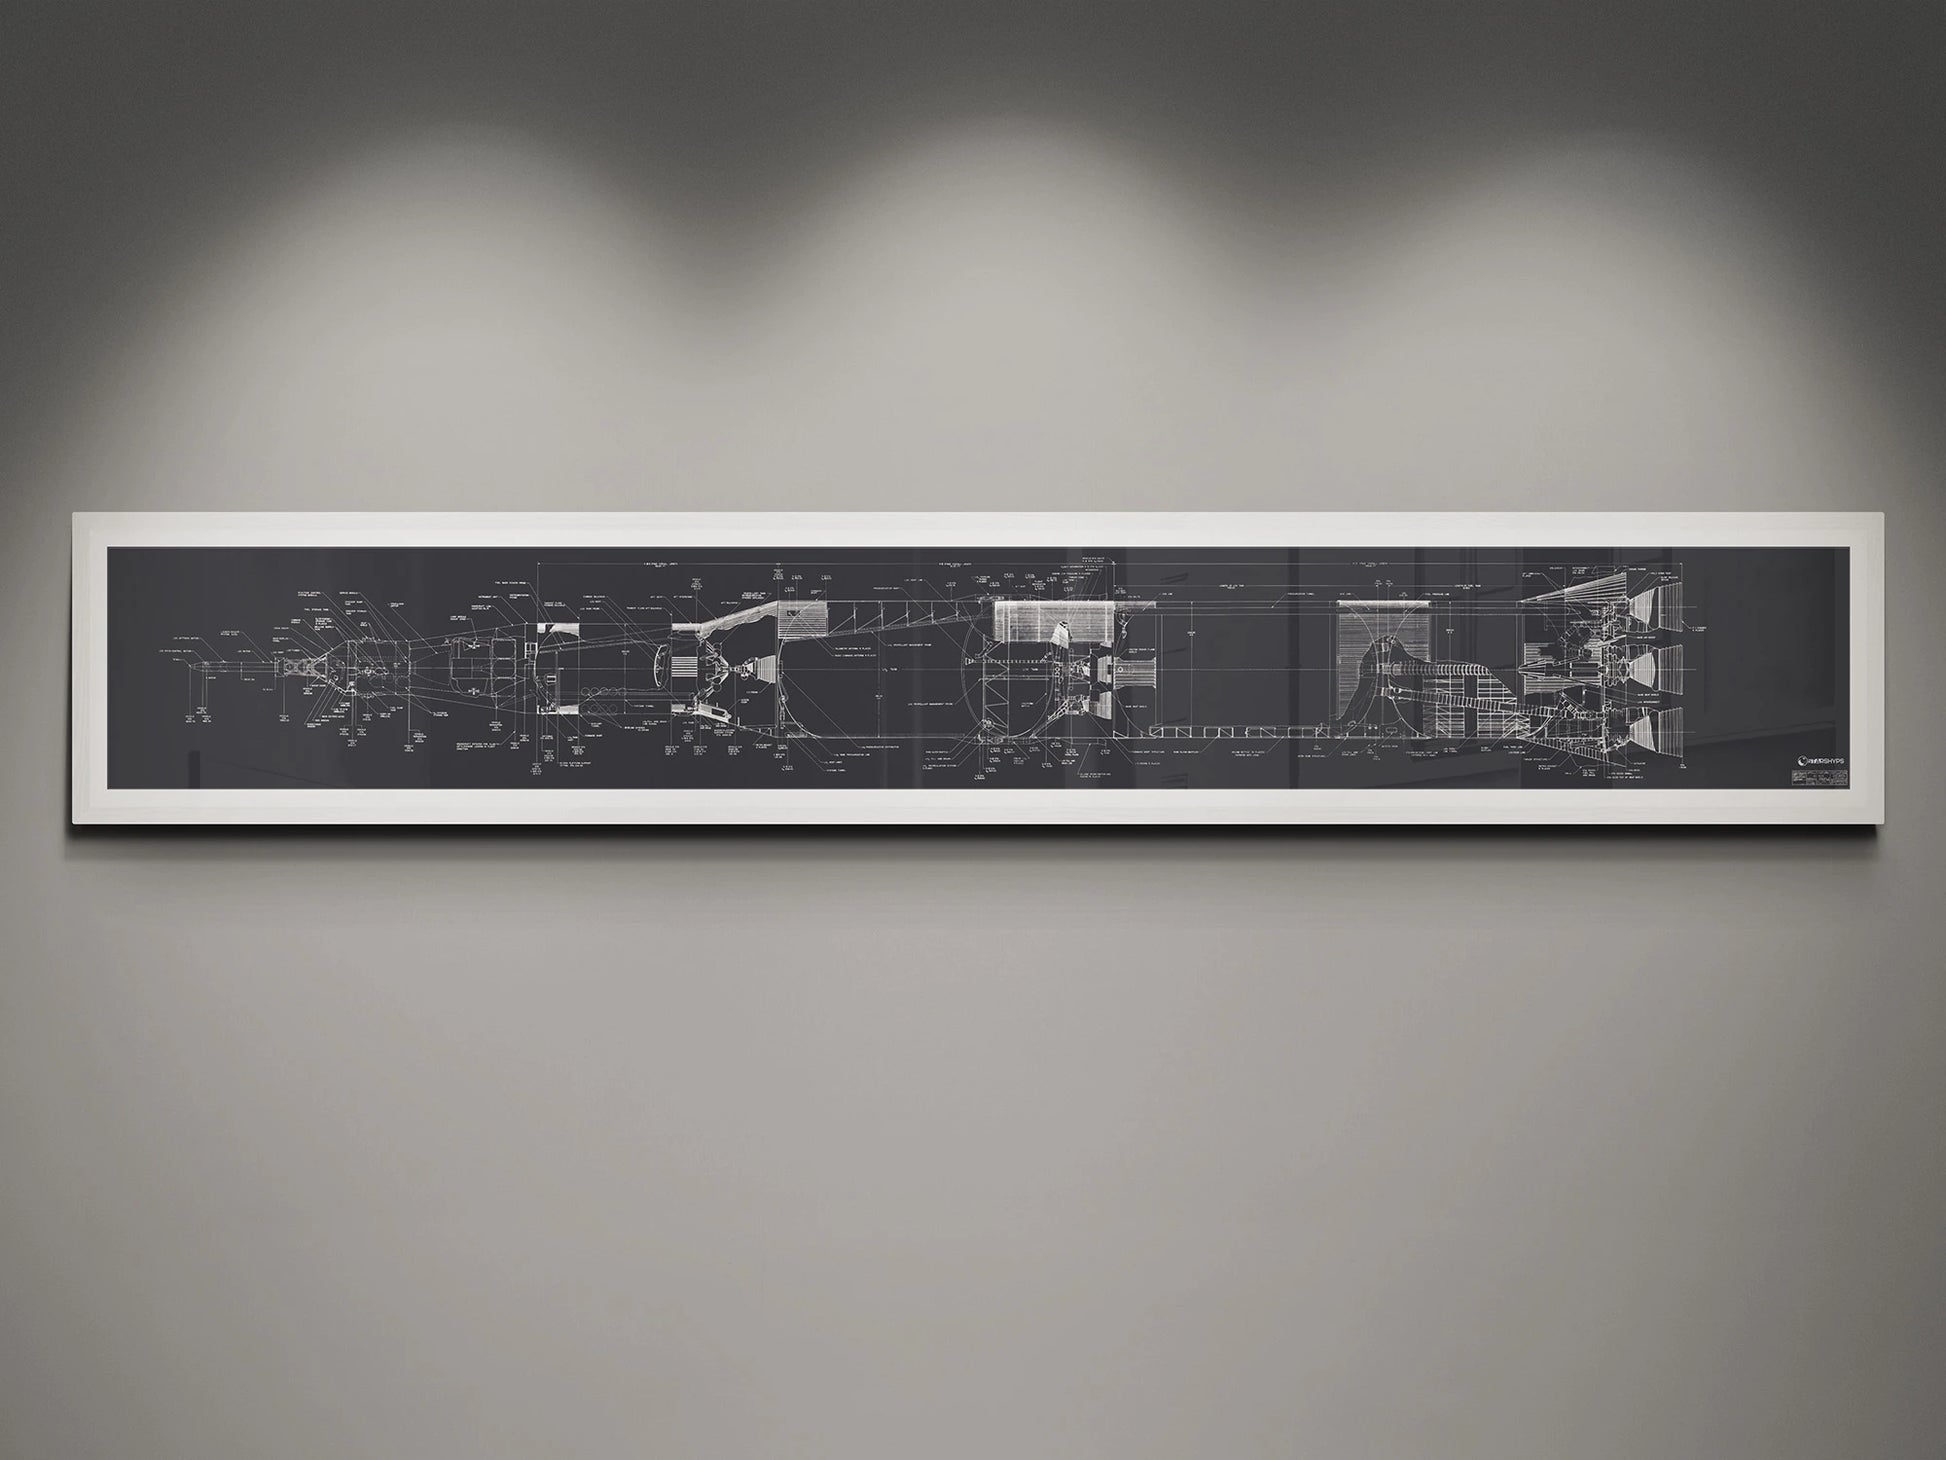 Apollo Saturn V | Rocket Blueprint Posters | NASA | A framed blueprint of the NASA Saturn V rocket, showcasing intricate technical drawings in white on a charcoal background. The blueprint is mounted on a gray wall and highlighted by soft overhead lights.